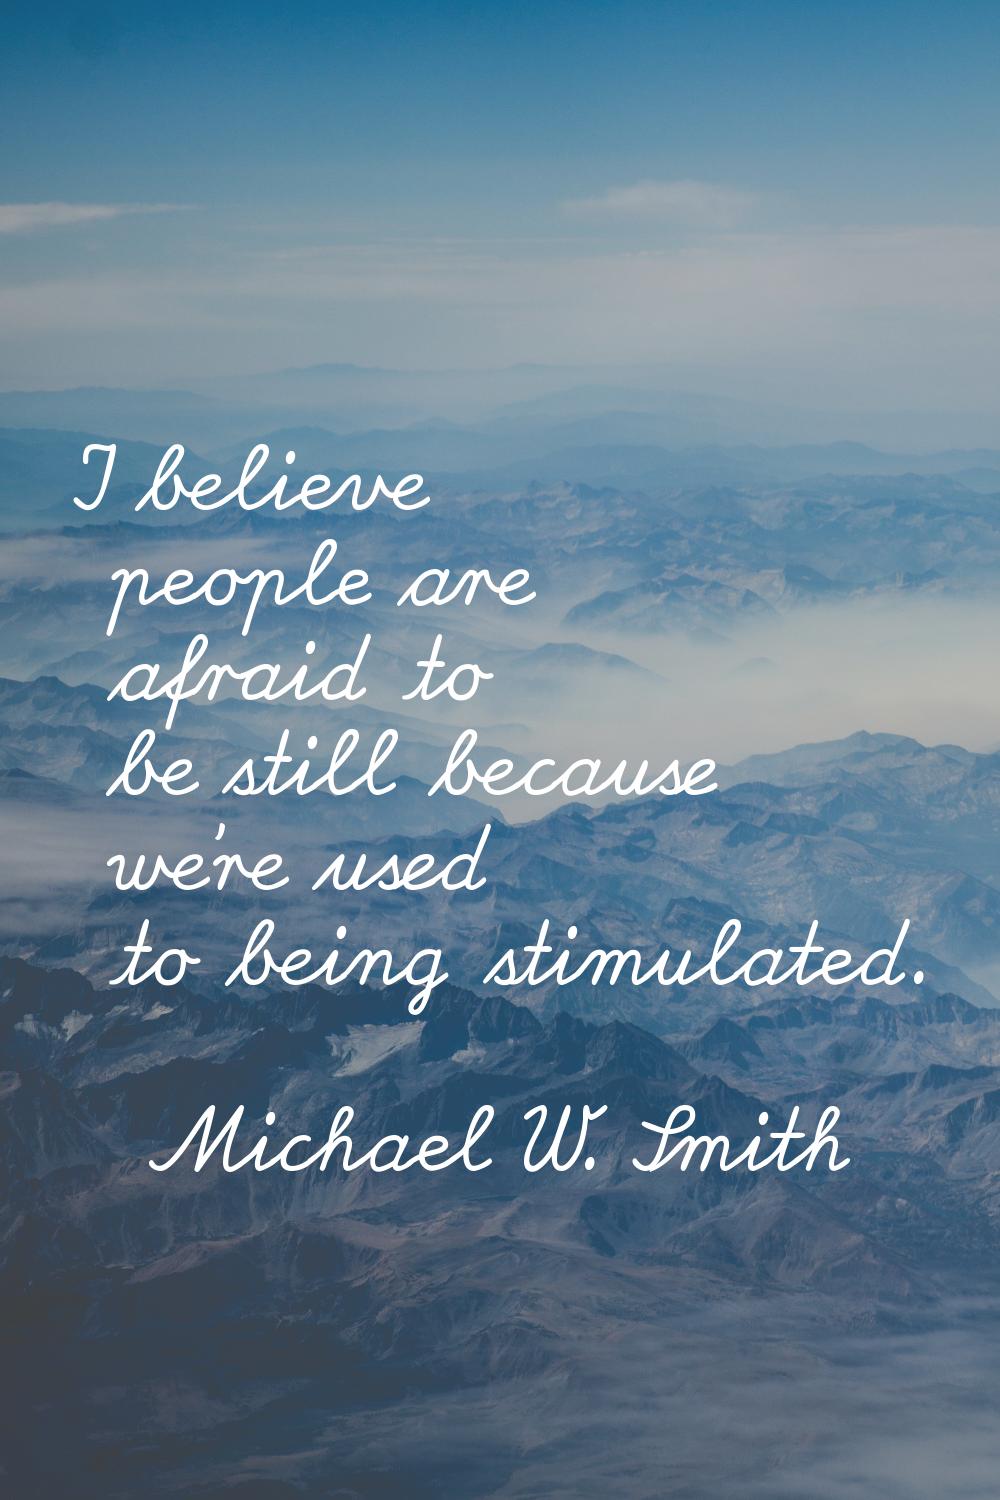 I believe people are afraid to be still because we're used to being stimulated.